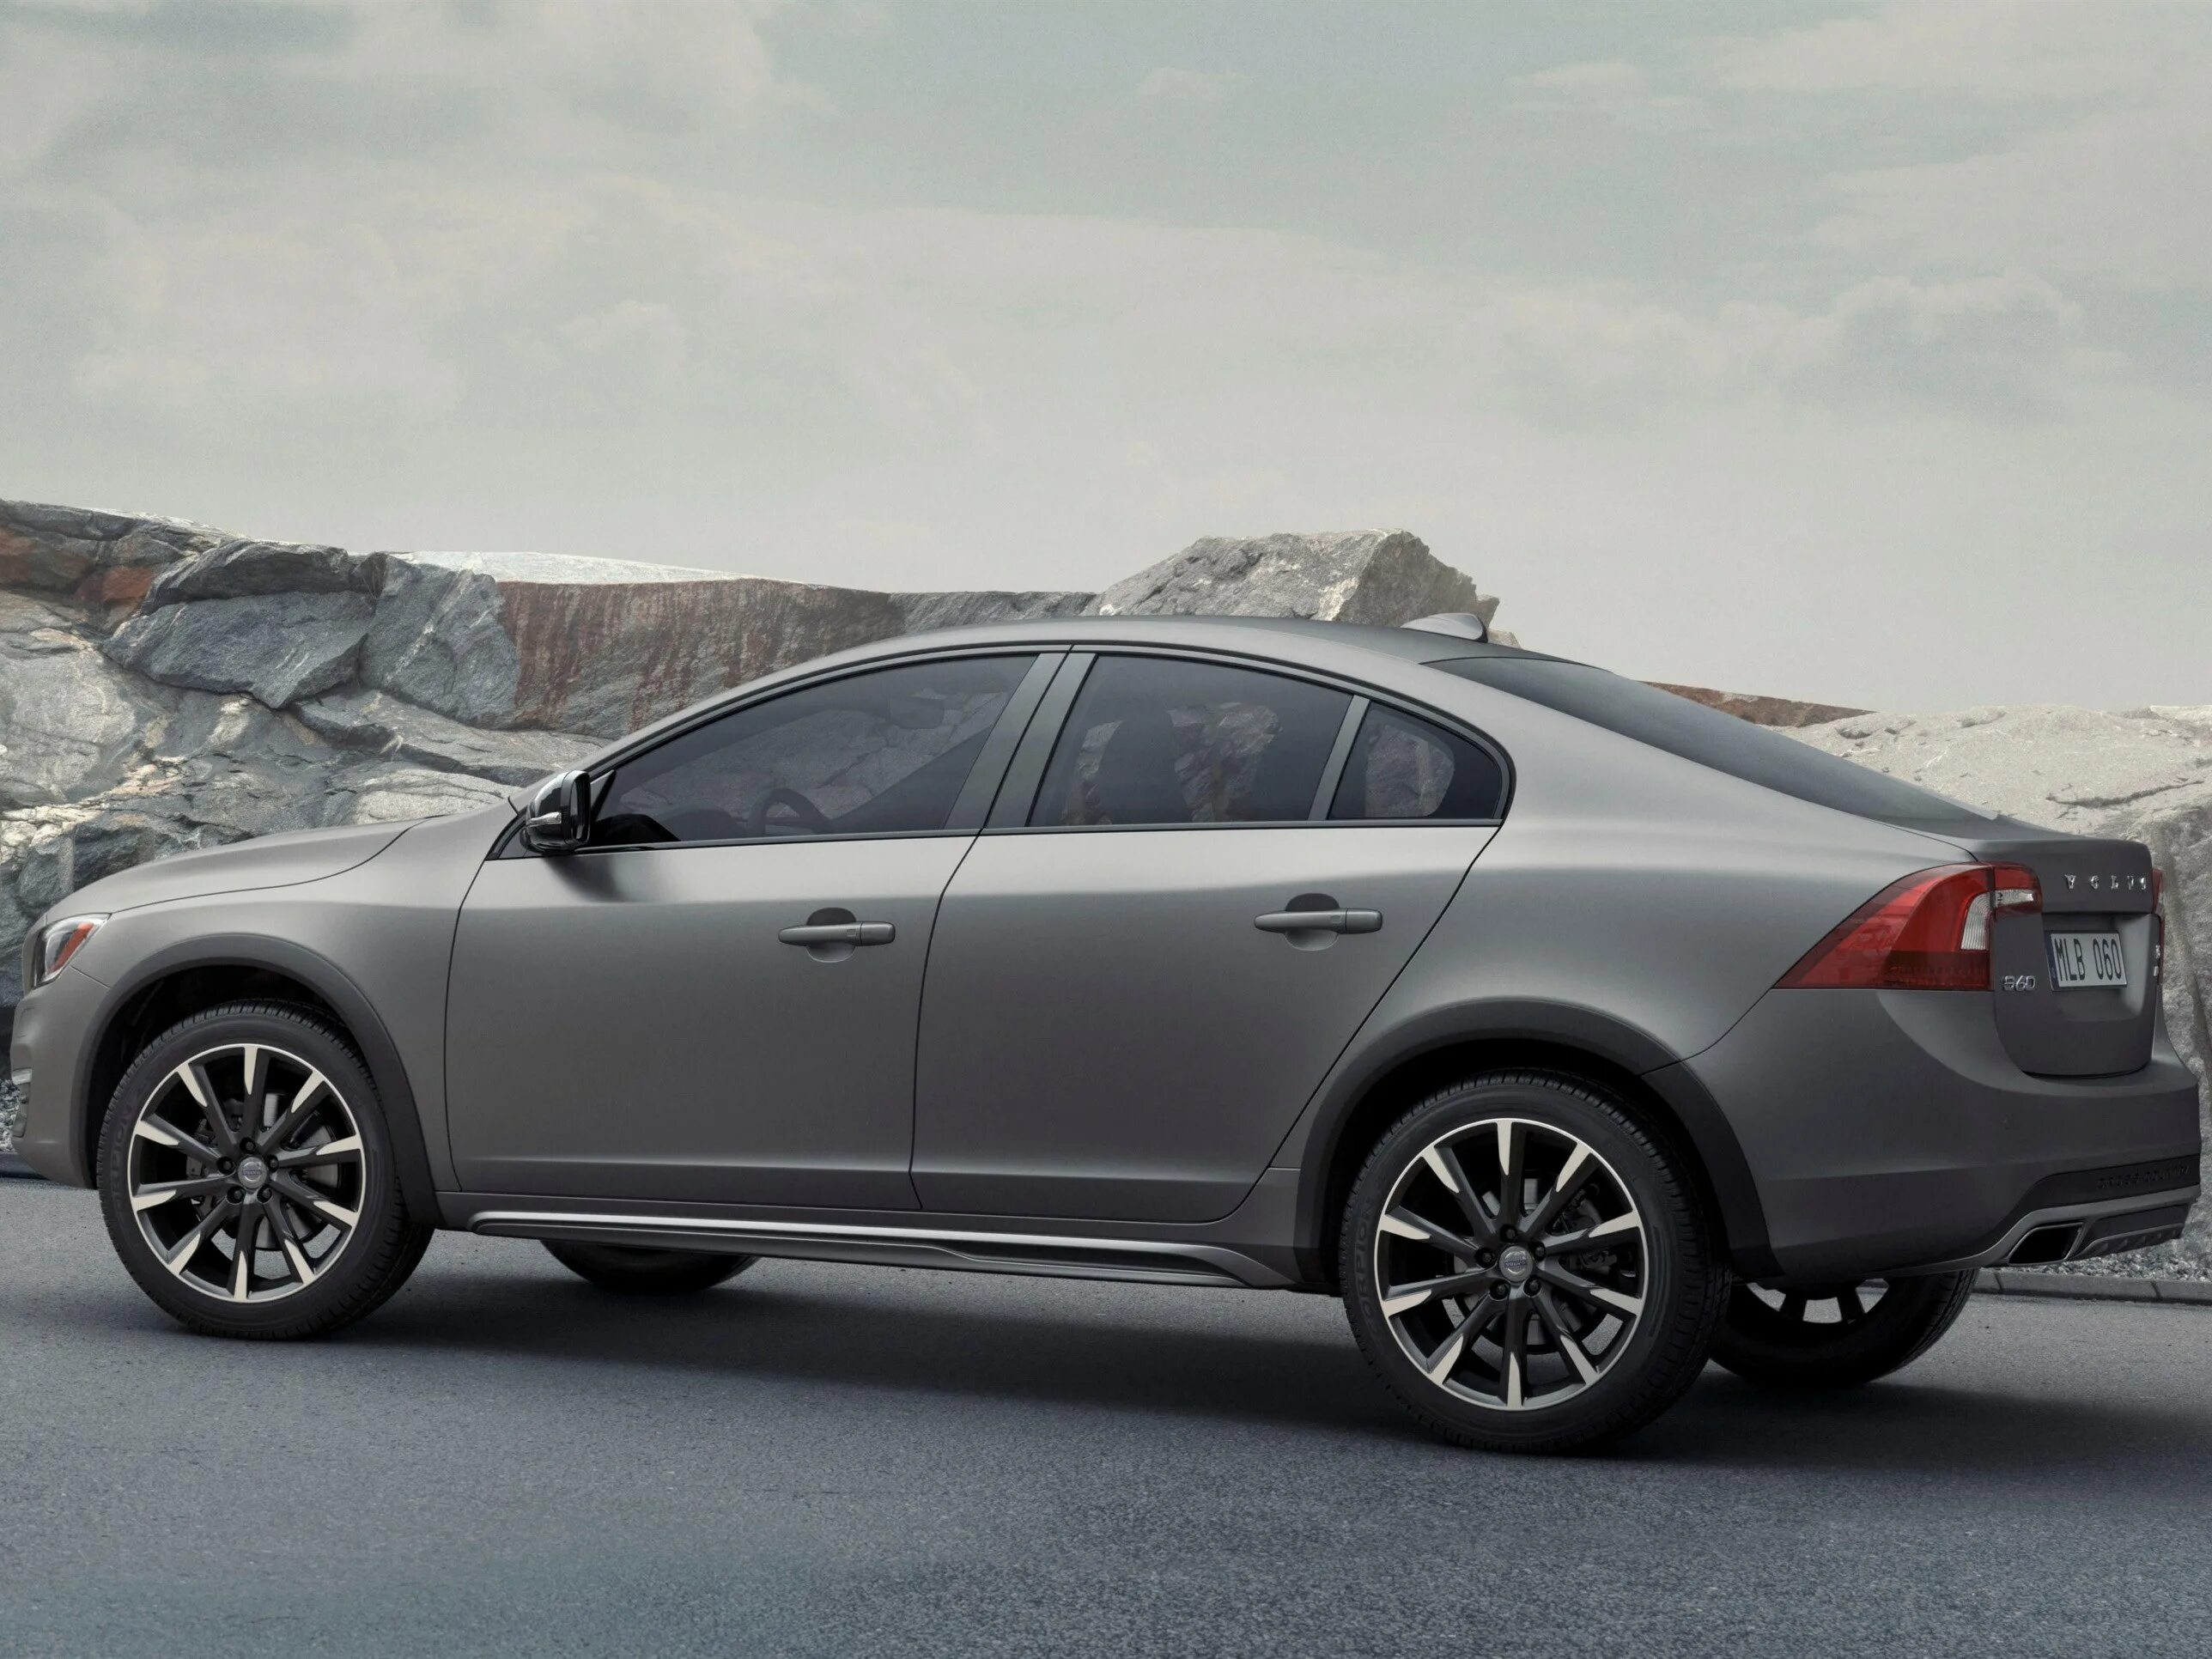 Volvo s60 Cross Country 2015. Volvo Cross Country s60 2016. Volvo s60 Cross Country. Вольво s60 Cross Country 2016.